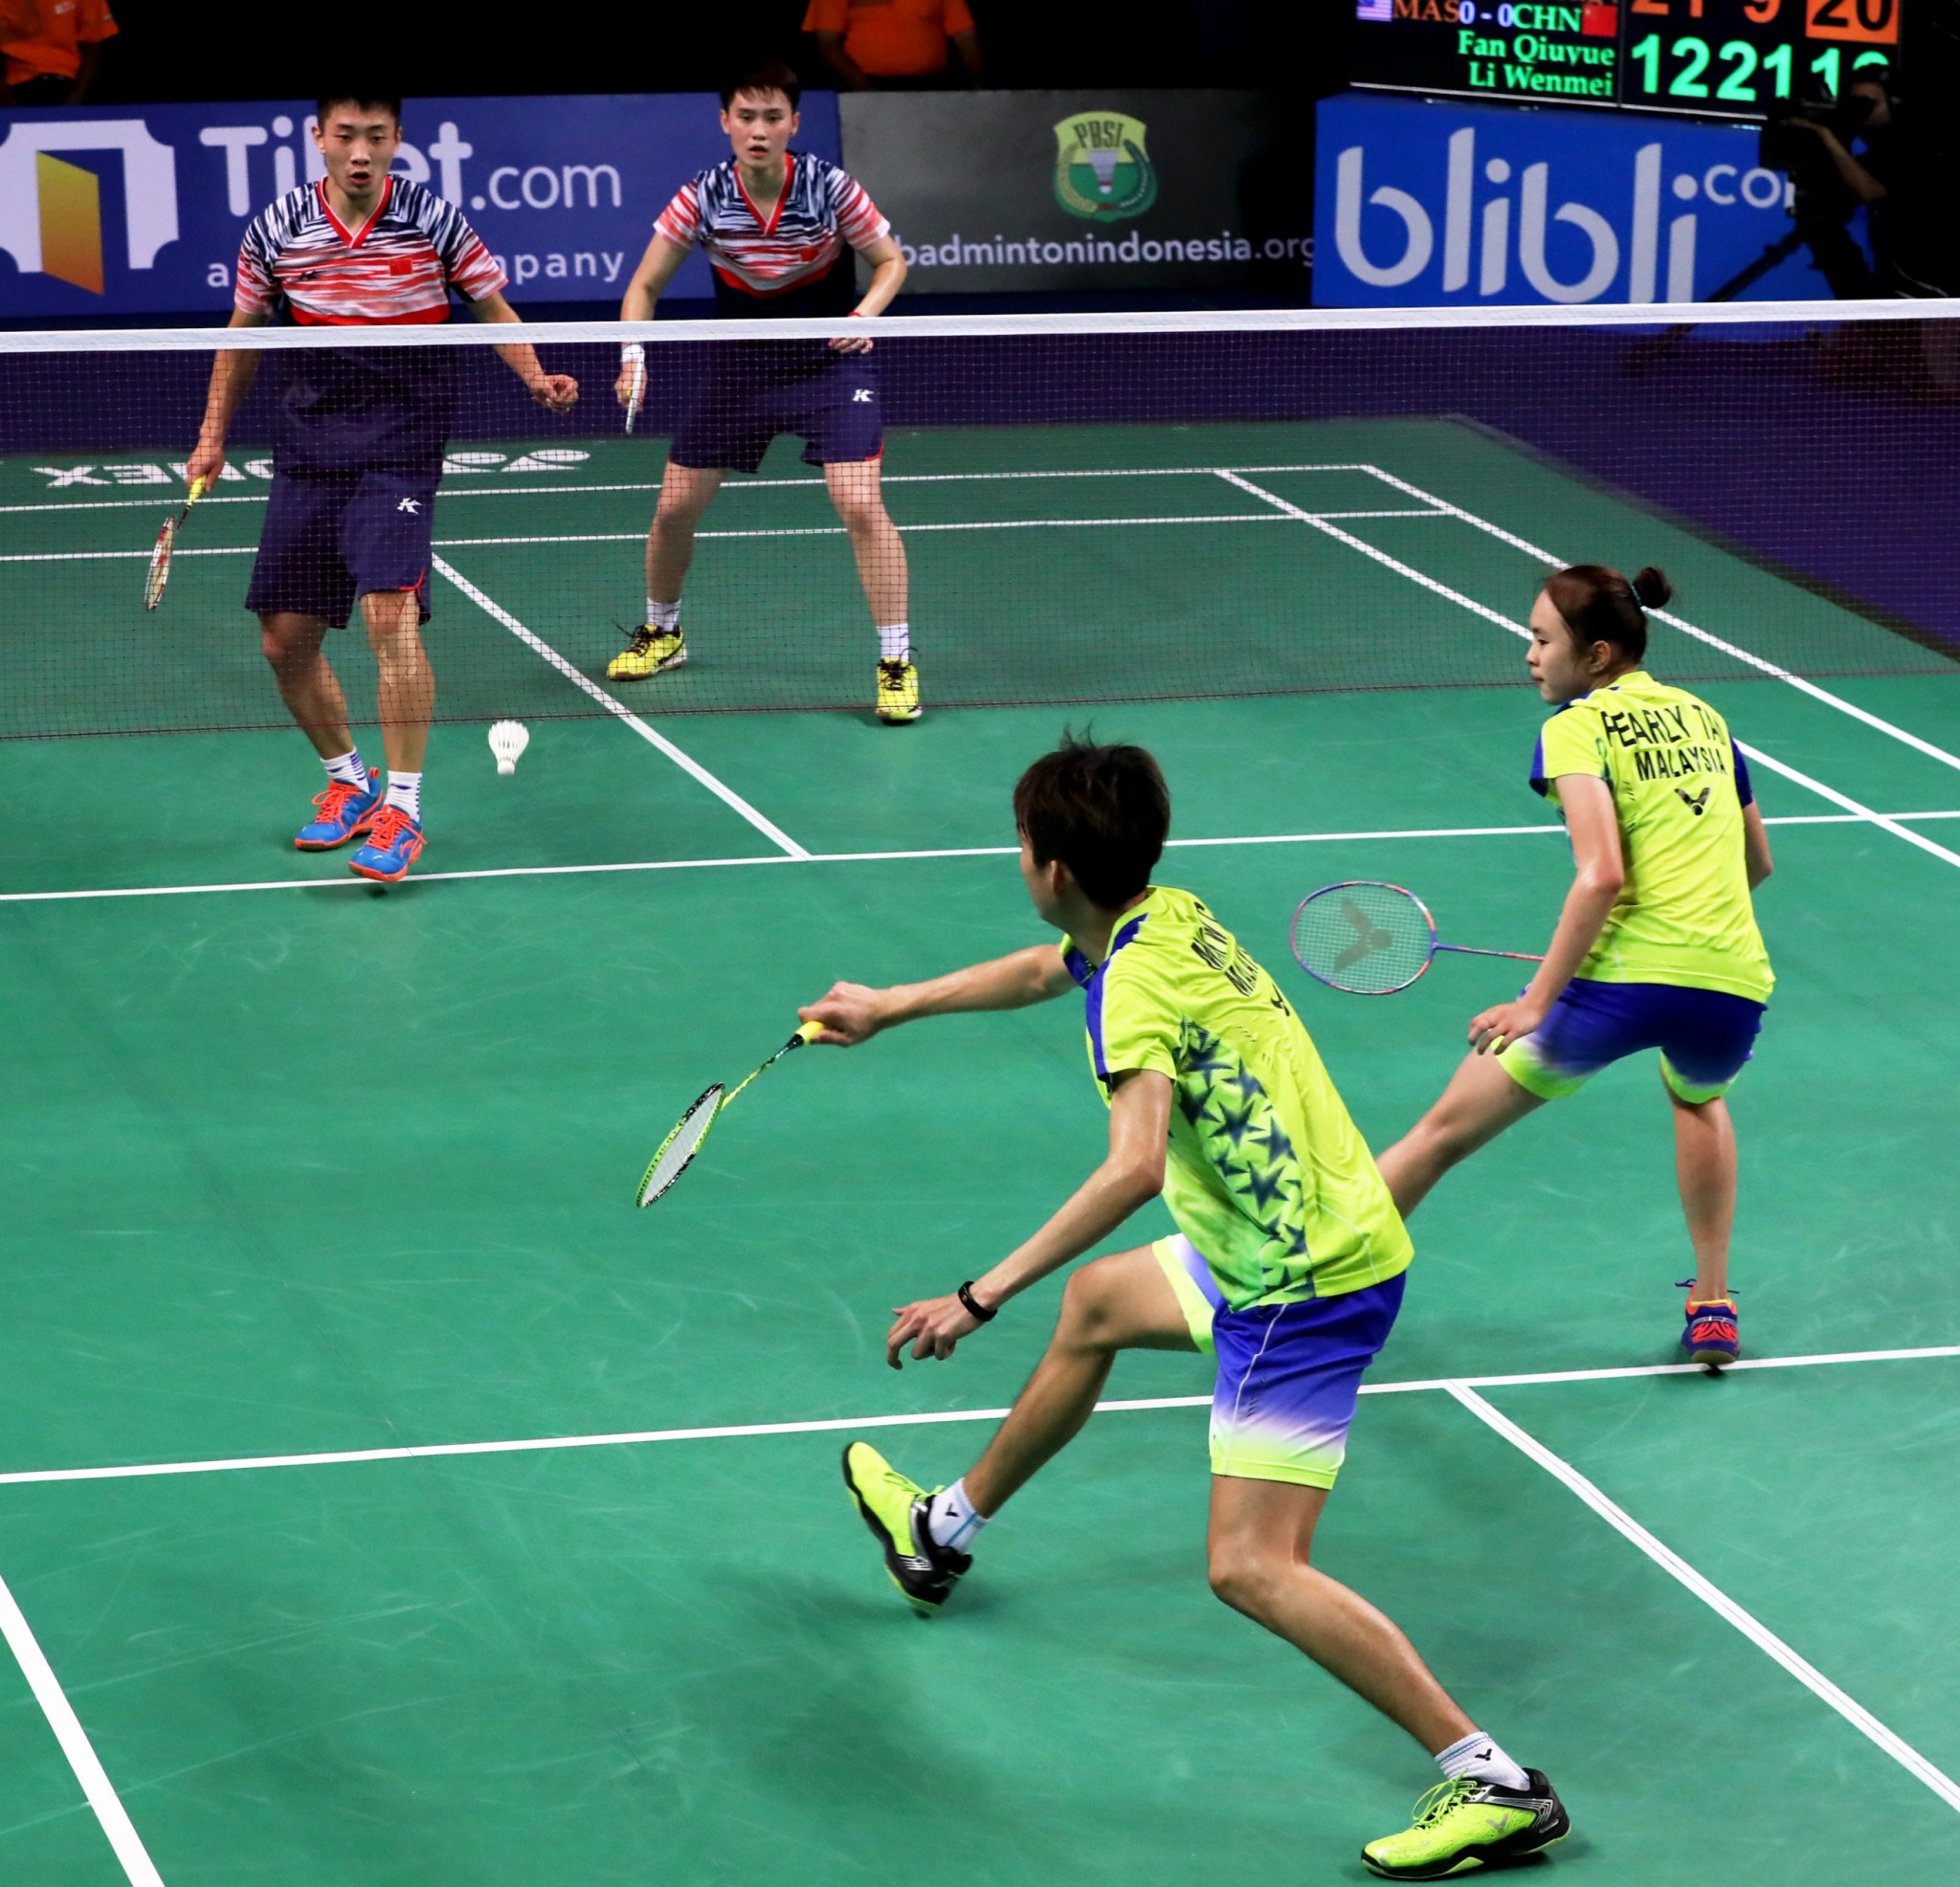 China recovered from losing the opening match to clinch their 12th mixed team title ©BWF